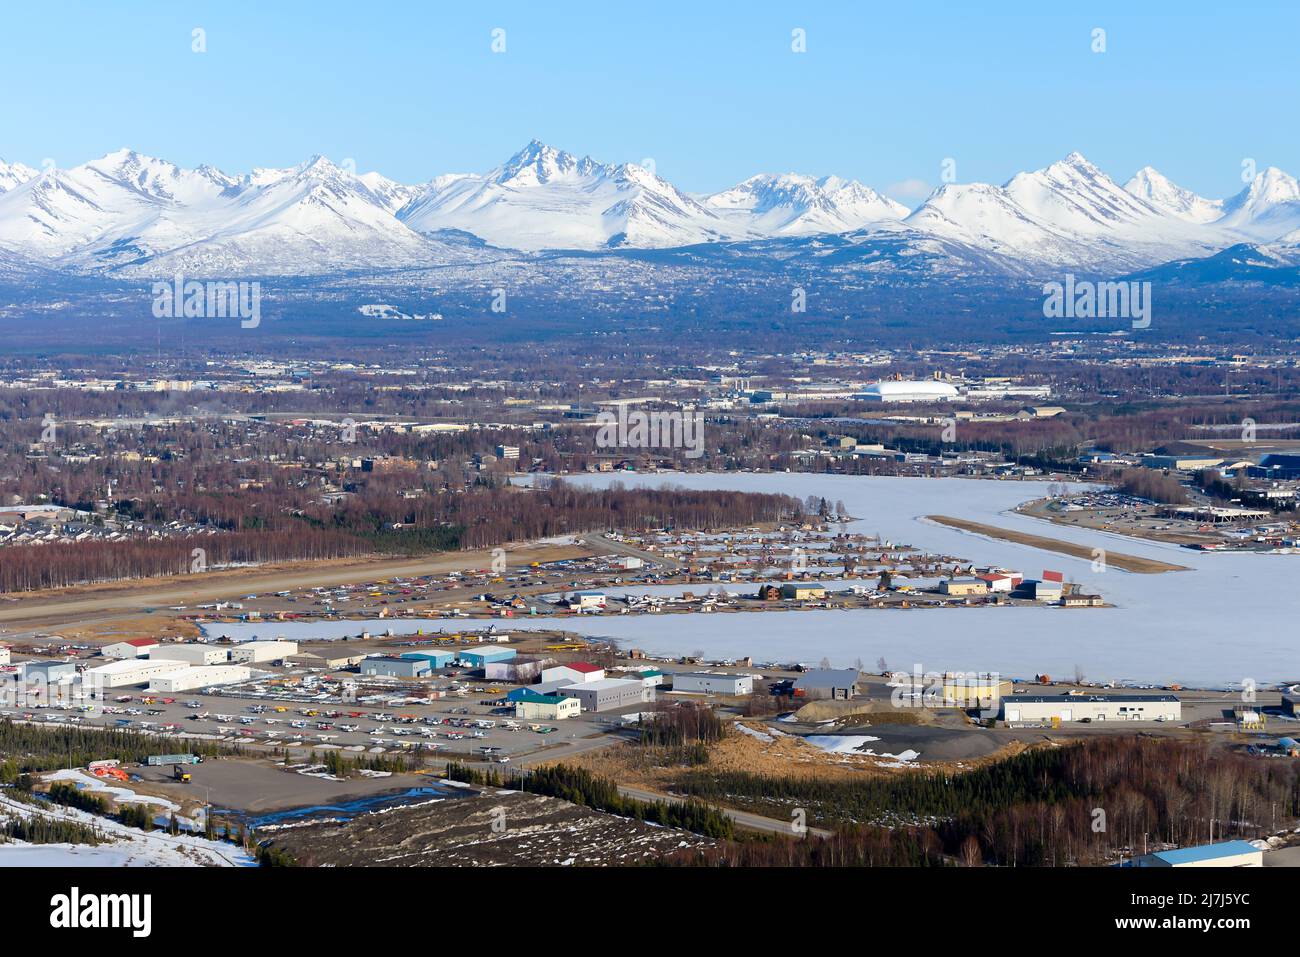 Lake Hood Seaplane Base aerial view in Anchorage. Busiest seaplane base in the world located on Lakes Hood and Spenard with snow capped mountains. Stock Photo